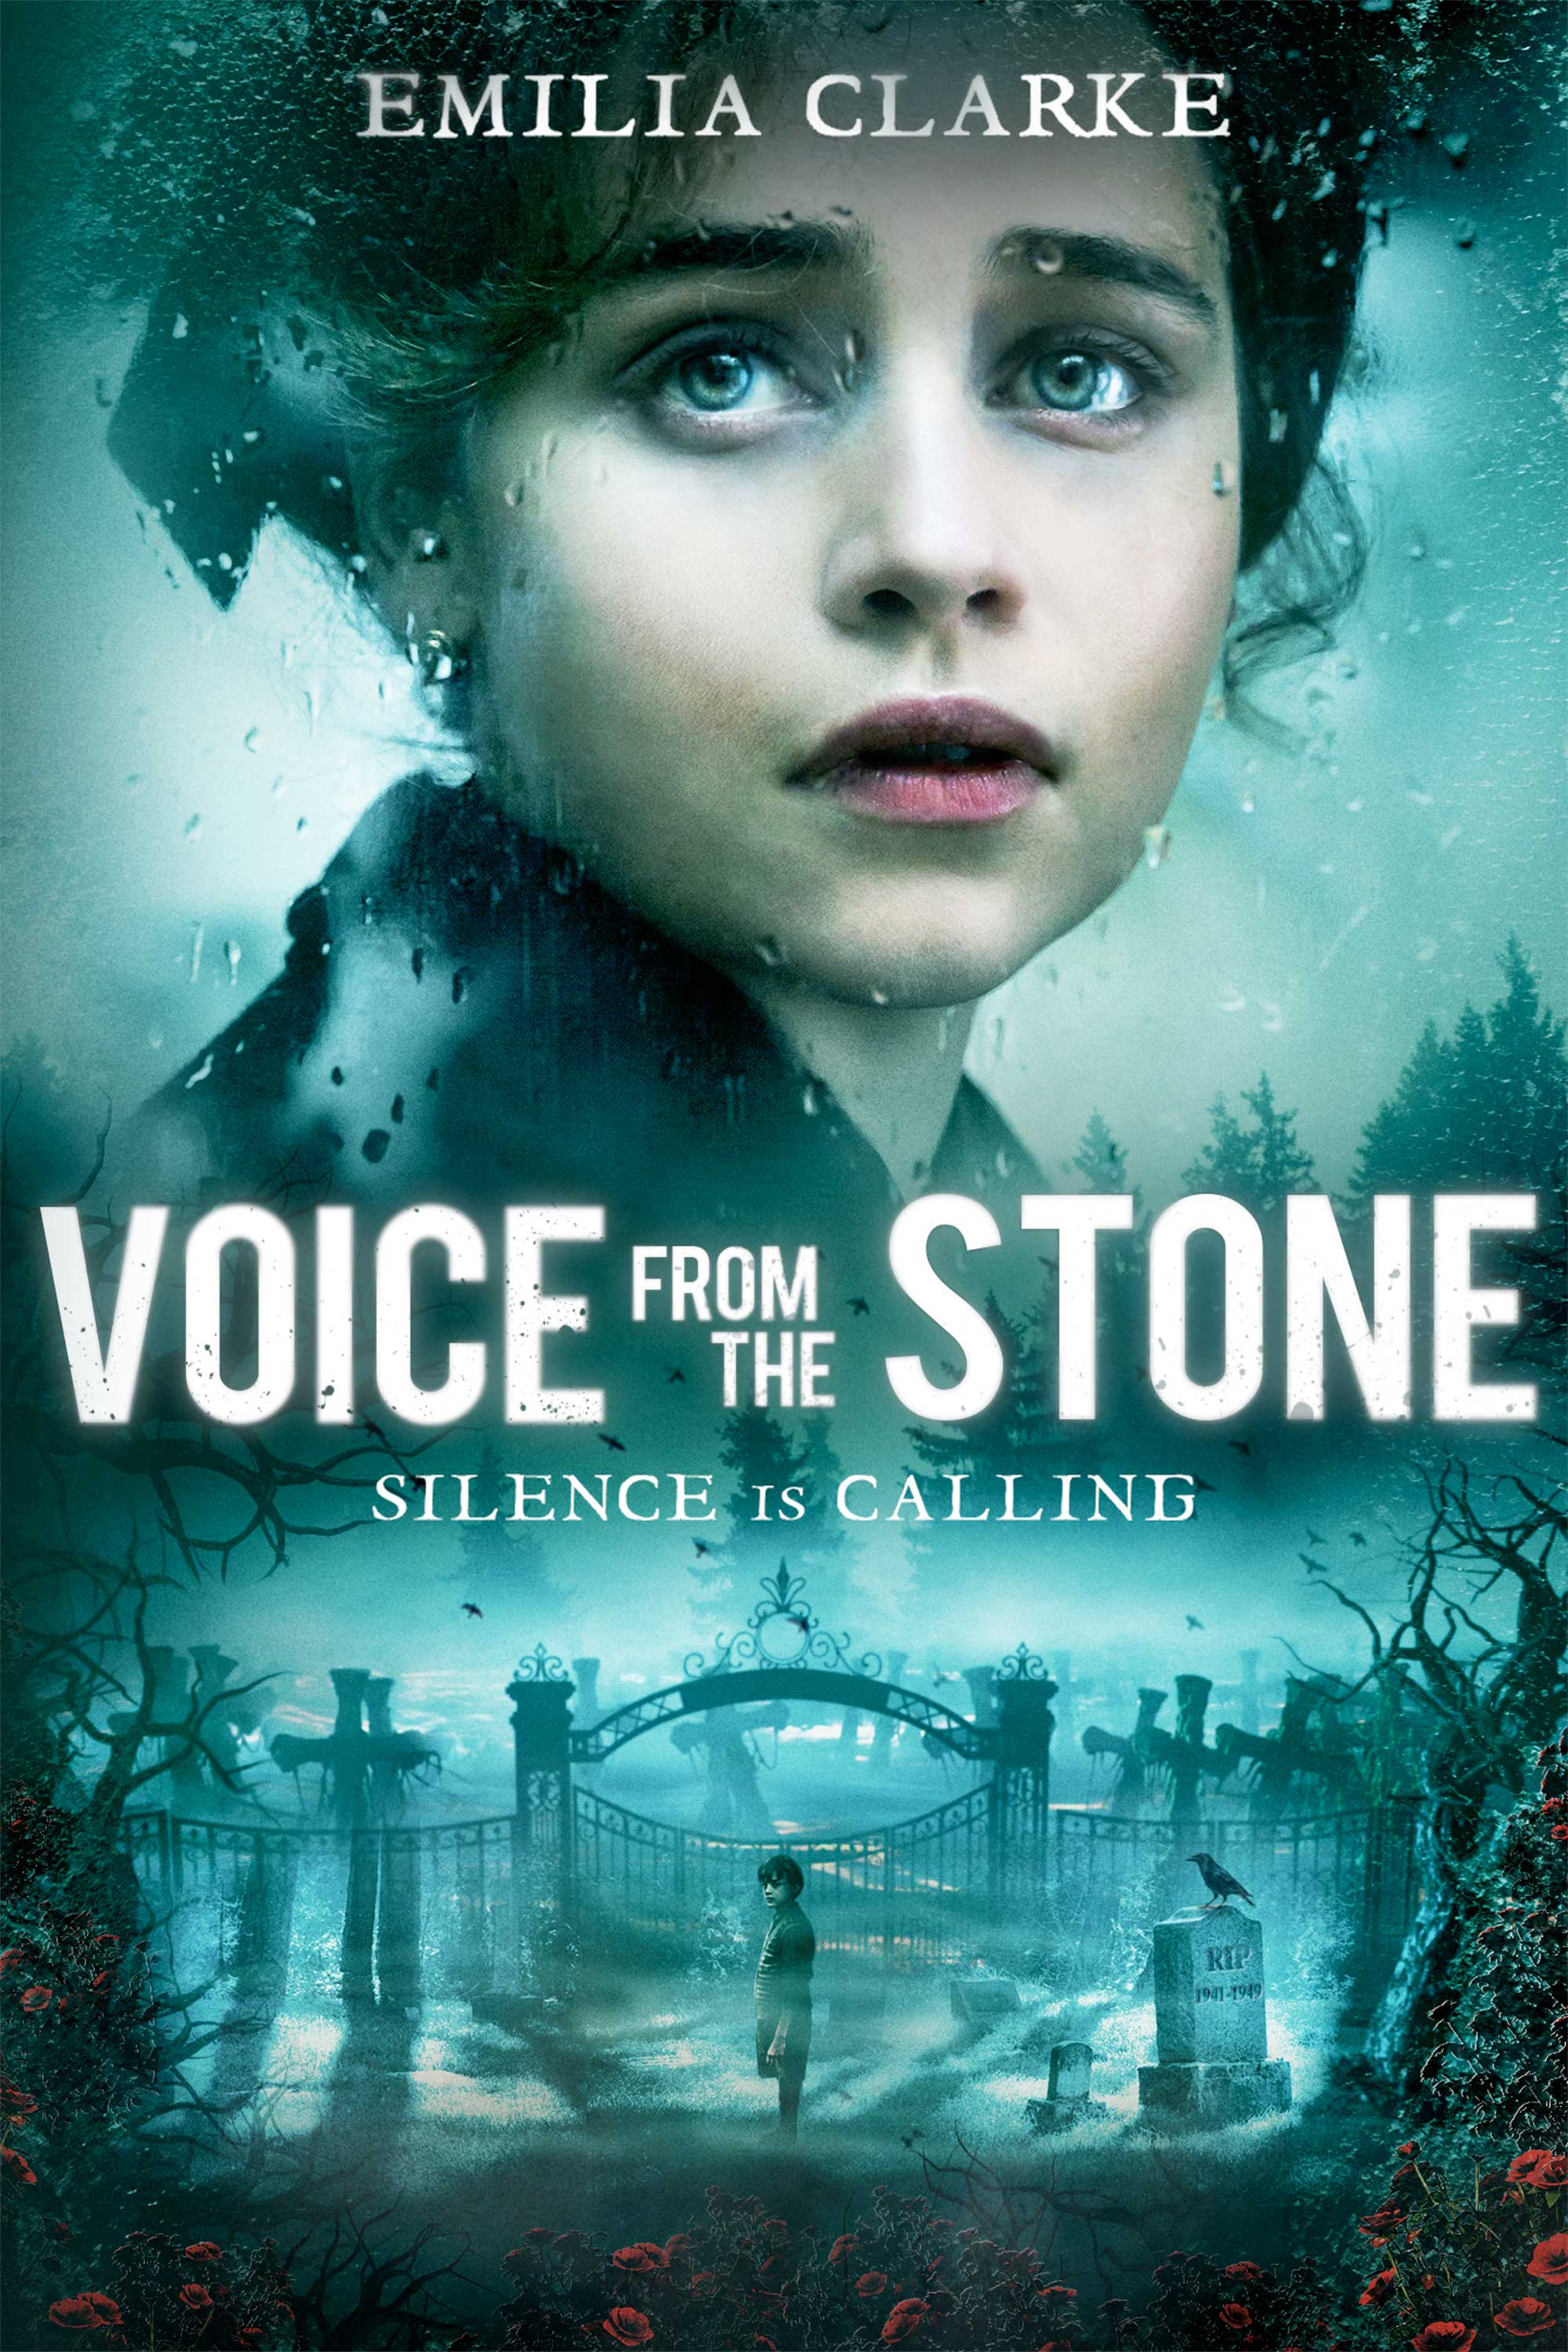 movie review voice from the stone